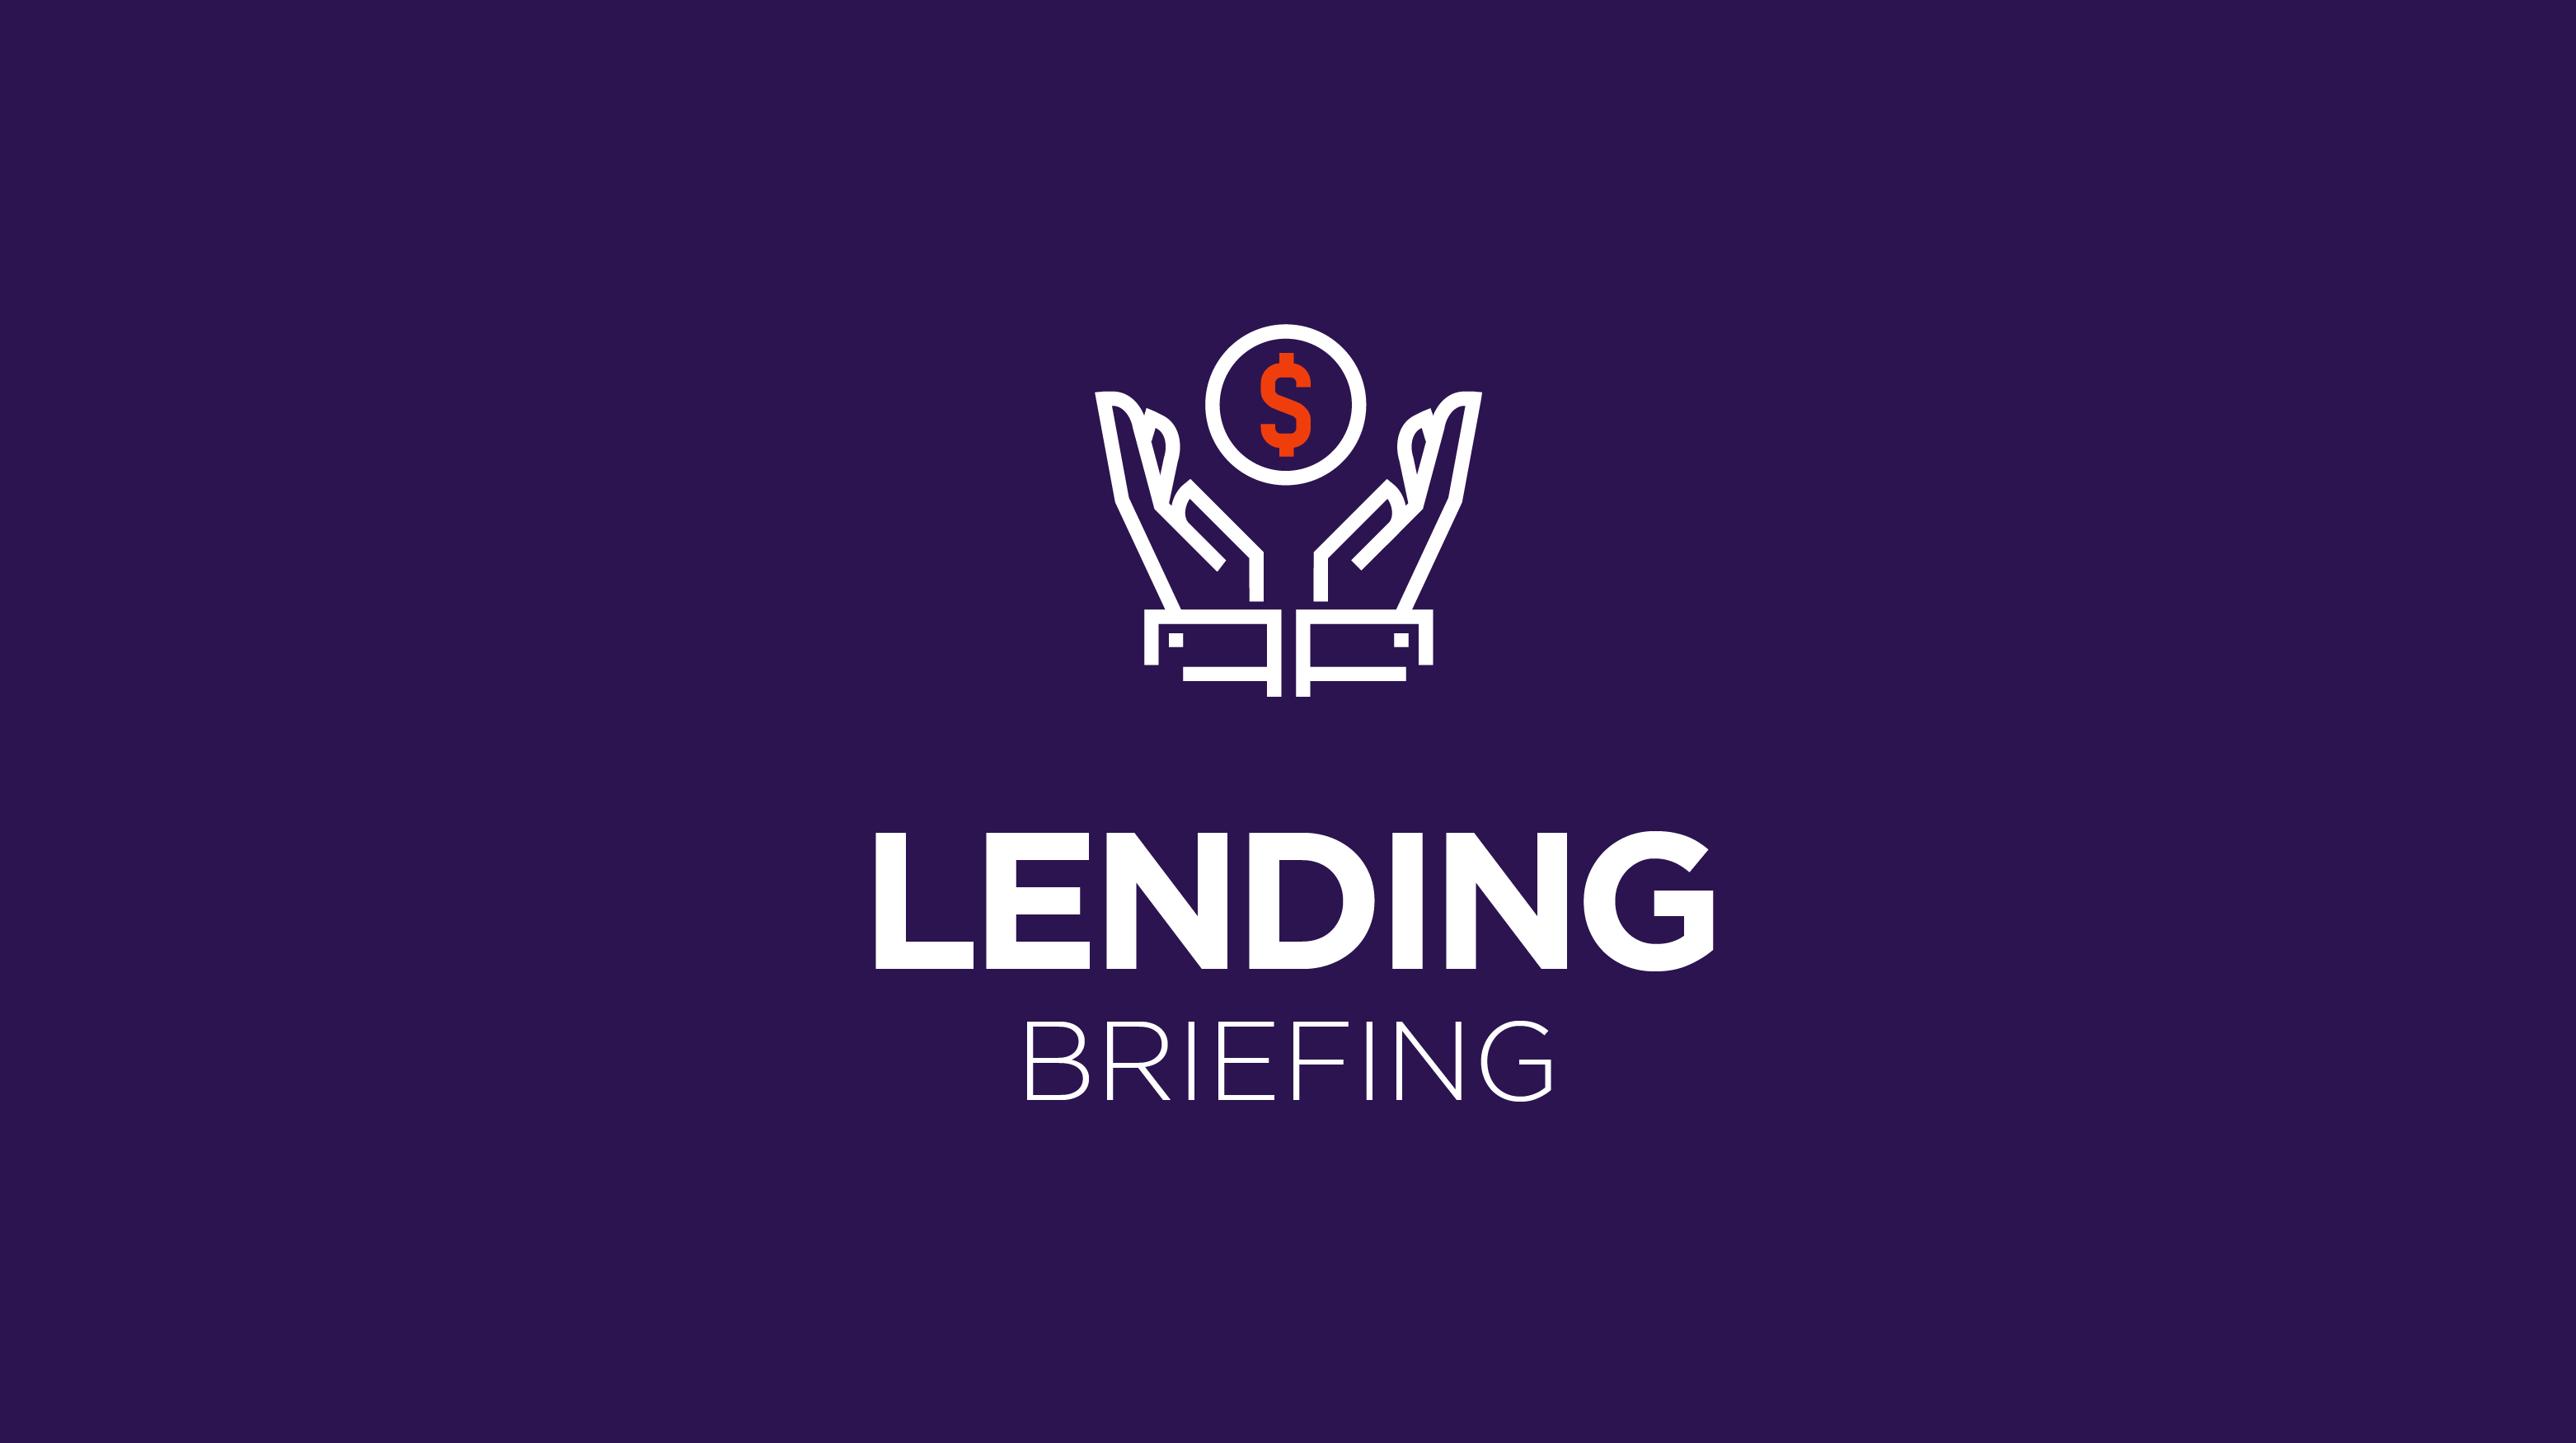 Lending Briefing: SaaS SMB lending competition heats up as more fintechs enter the market